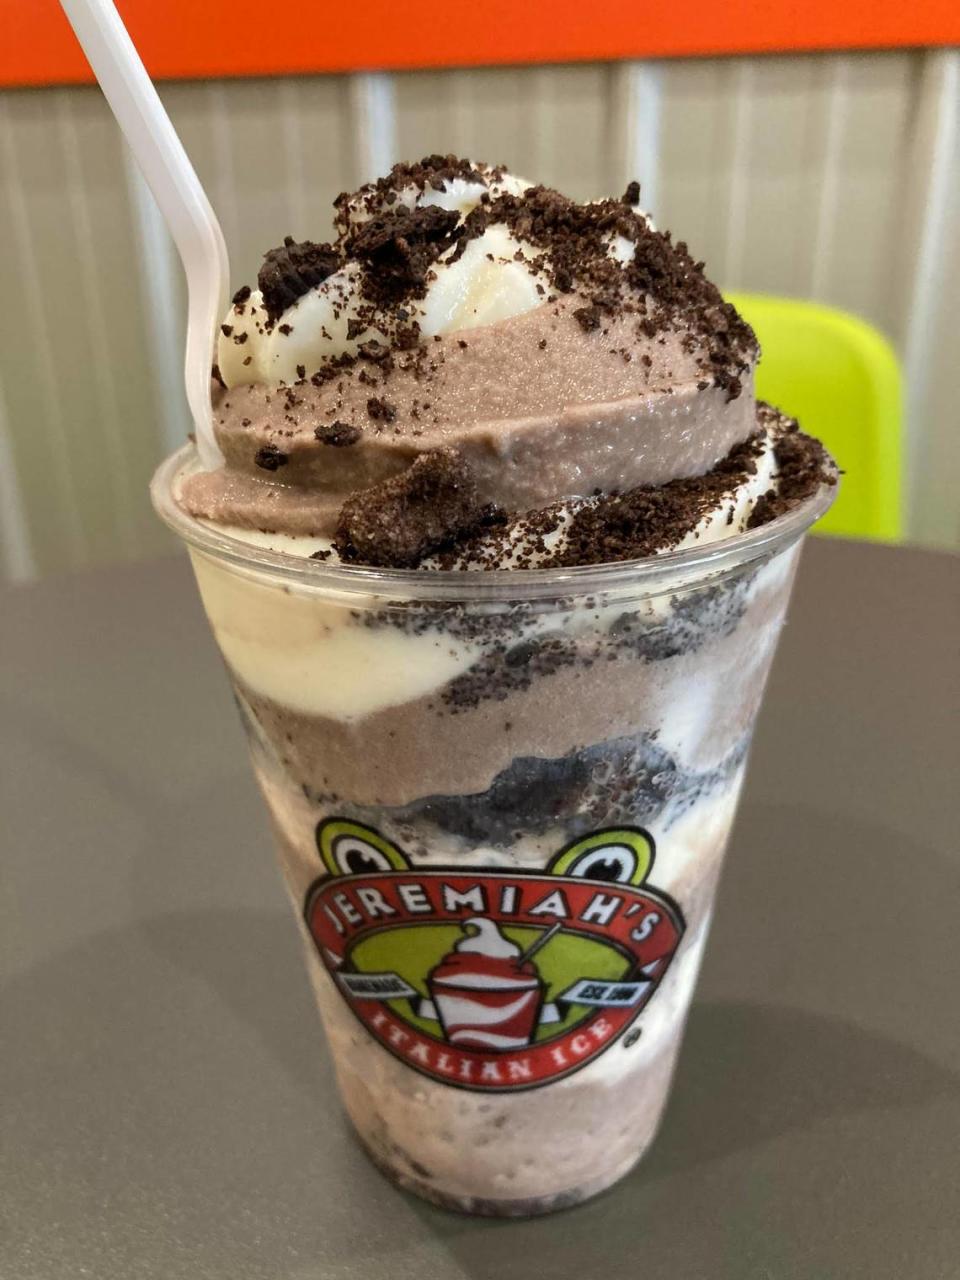 Jeremiah’s Italian Ice offers an Oreo mud pie gelati, which is layers of their cookies & cream Italian ice, swirled vanilla and chocolate soft-serve ice cream and Oreo cookie crumbles. A Warner Robins location, the first in Middle Georgia, opens Tuesday.